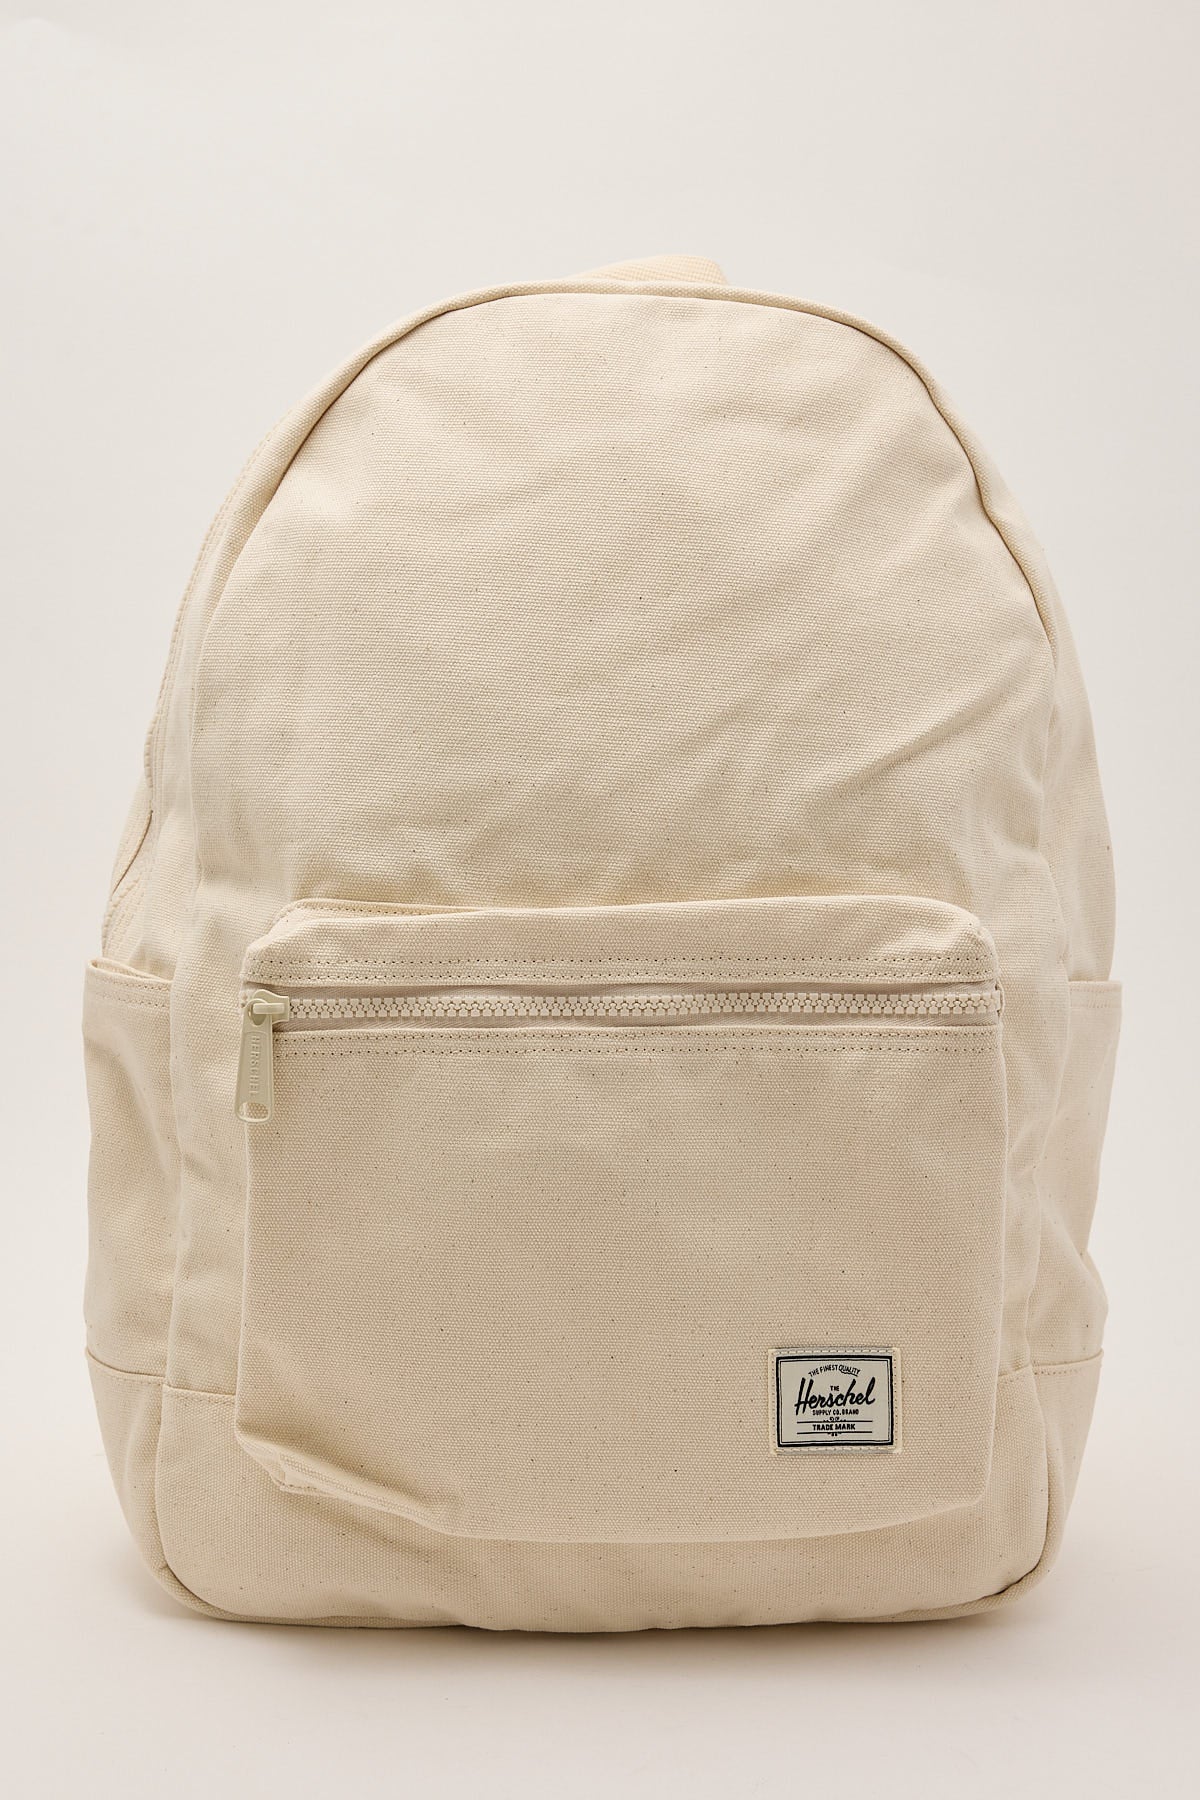 Herschel Supply Co. Pacific Day Pack Natural